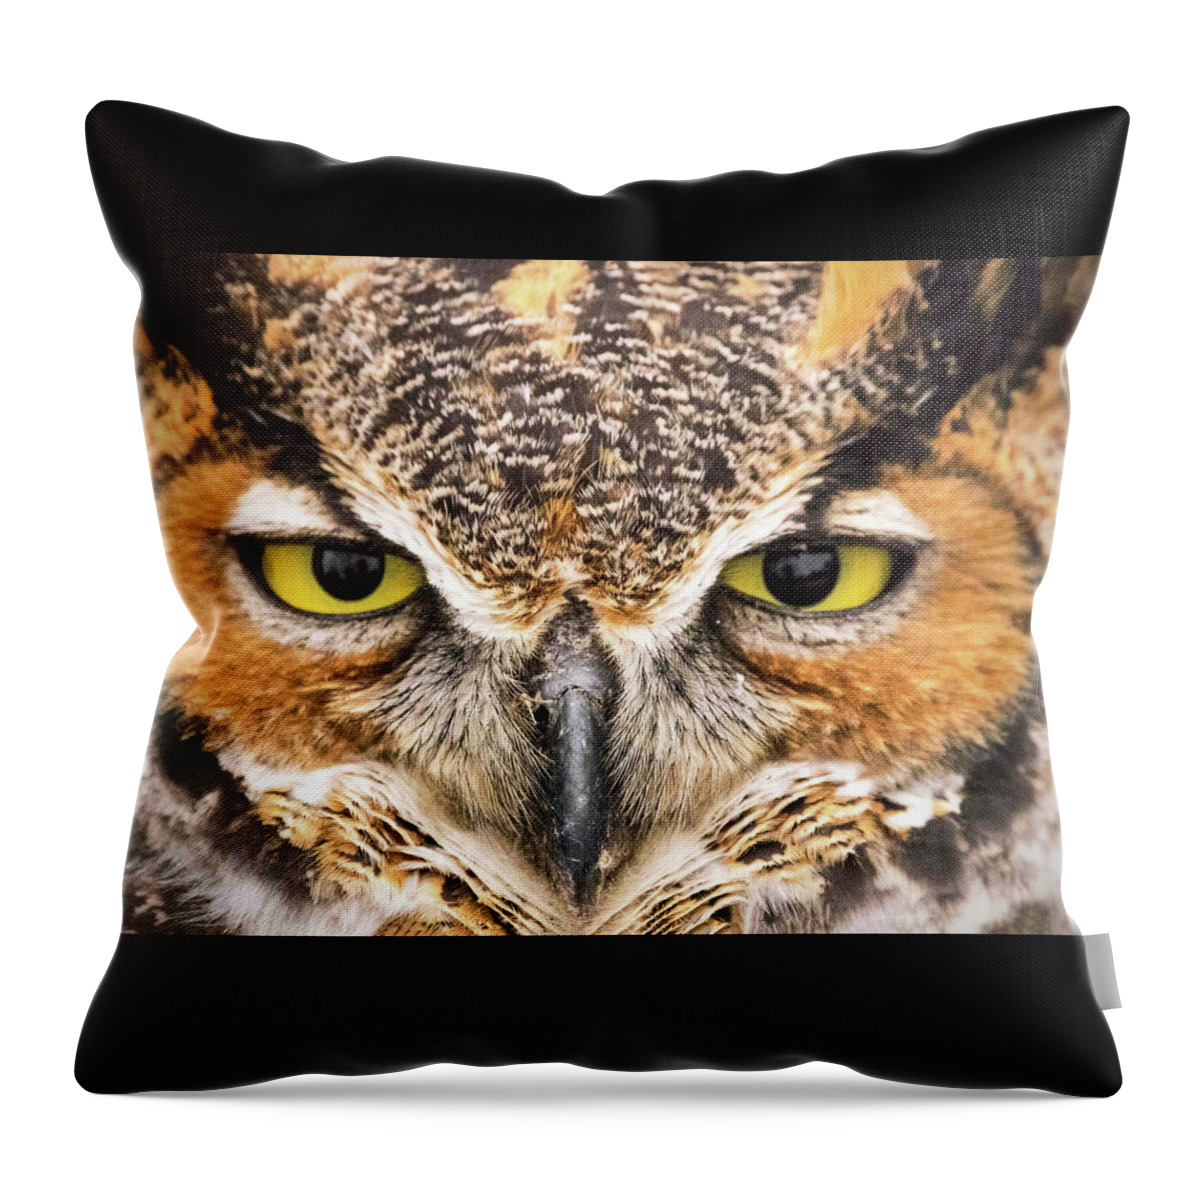 Owl Throw Pillow featuring the photograph Owl Eyes by Ira Marcus